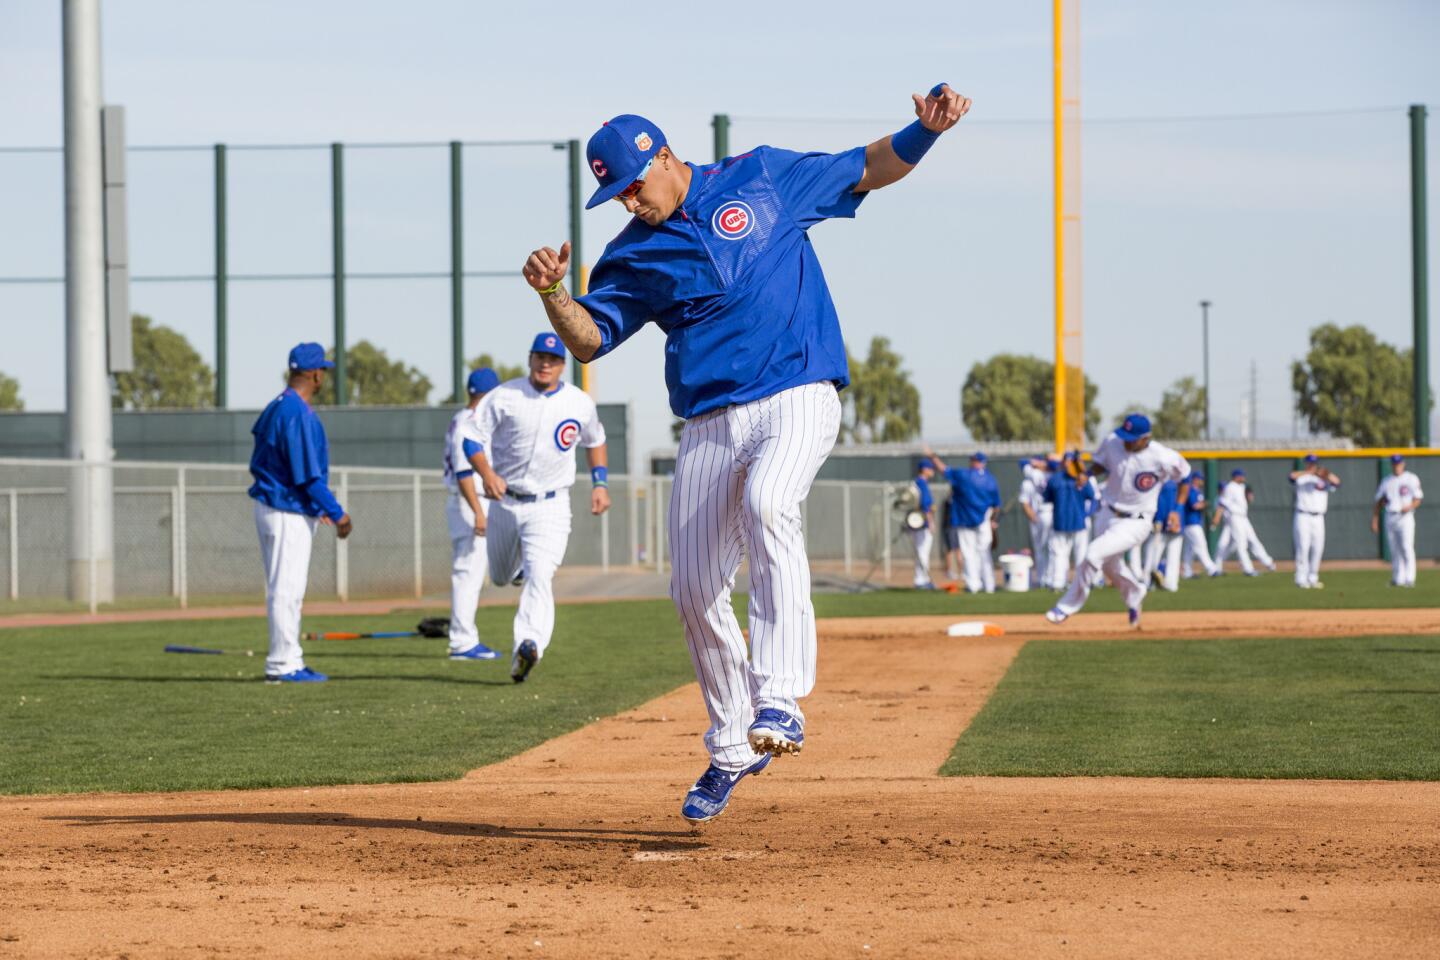 Javier Baez jumps in the air while crossing home plate during spring training at Sloan Park on Monday, Feb. 29, 2016, in Mesa, Ariz.